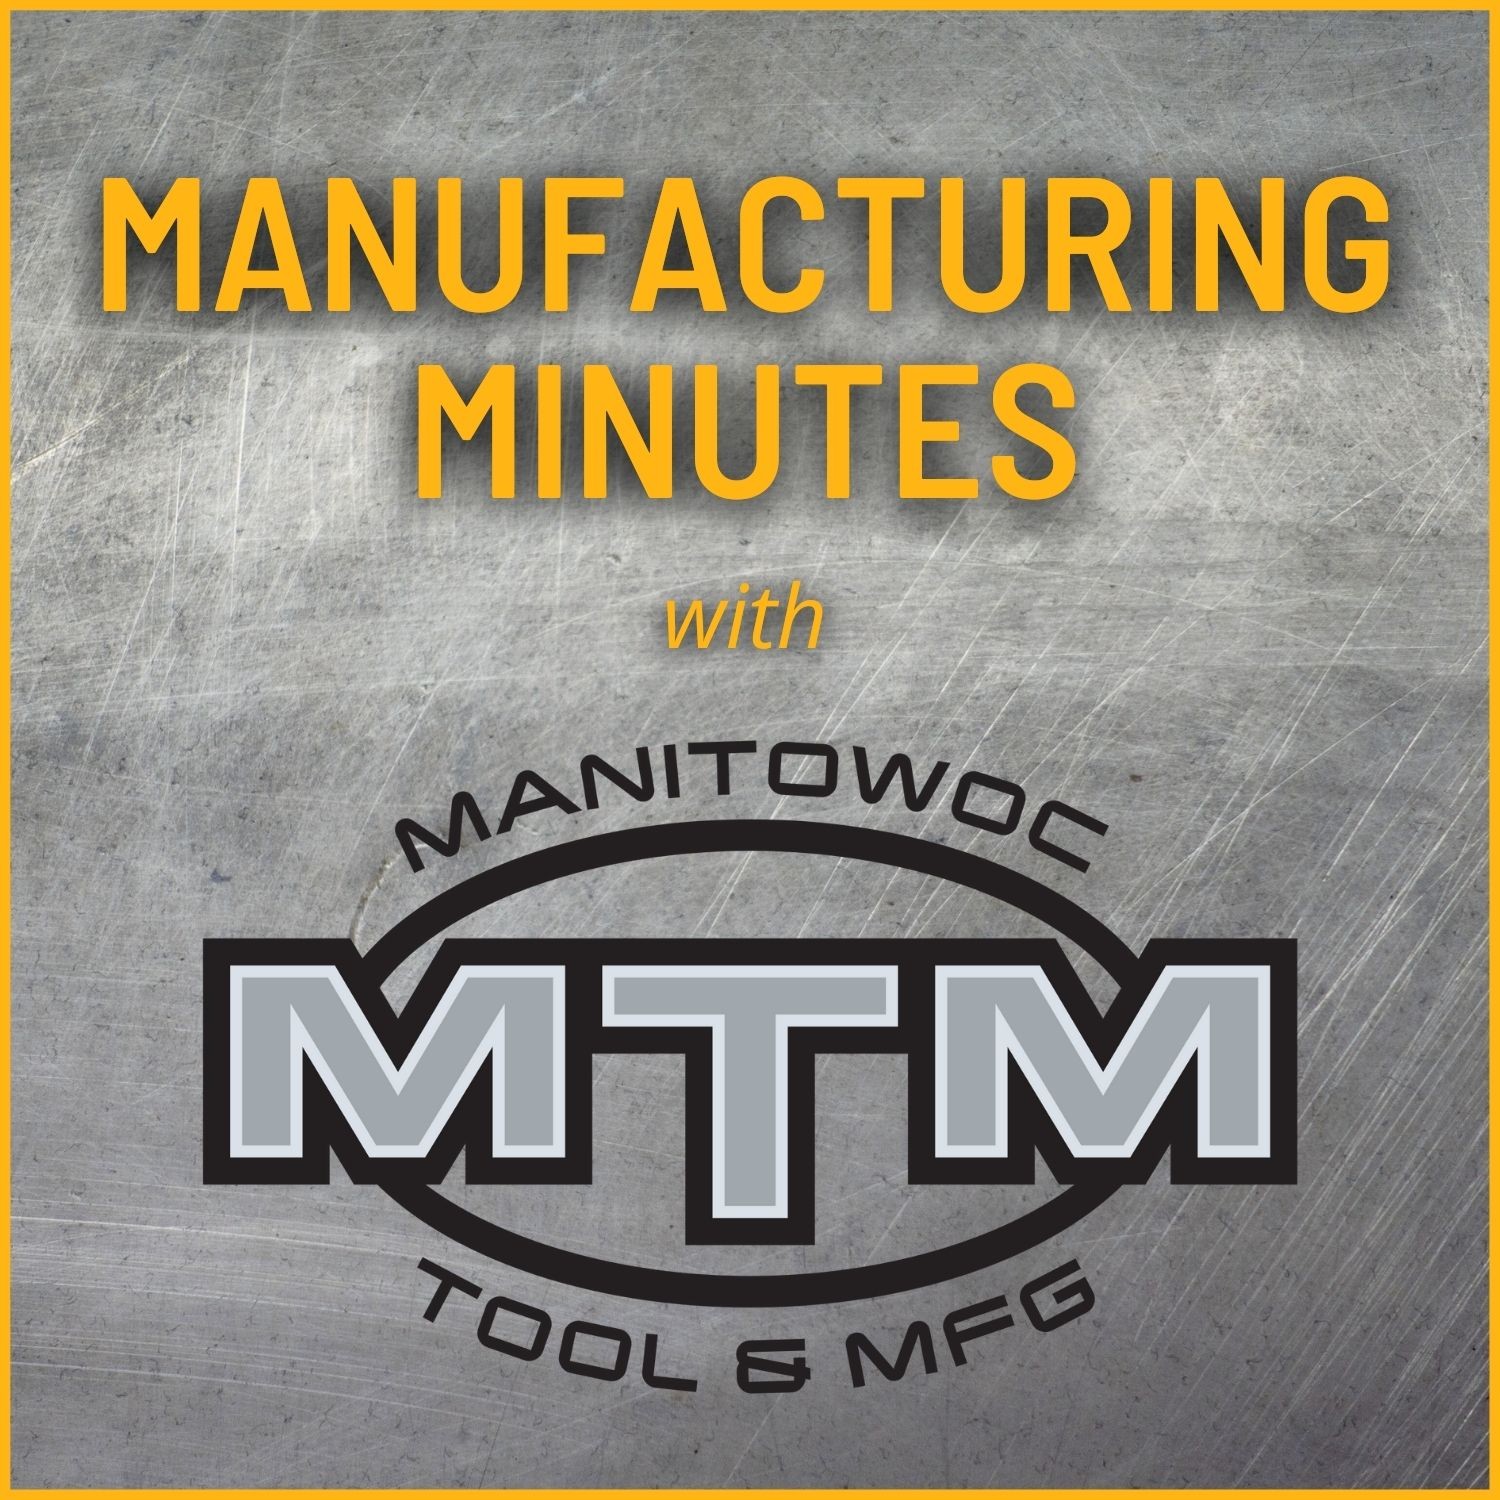 Manufacturing Minutes